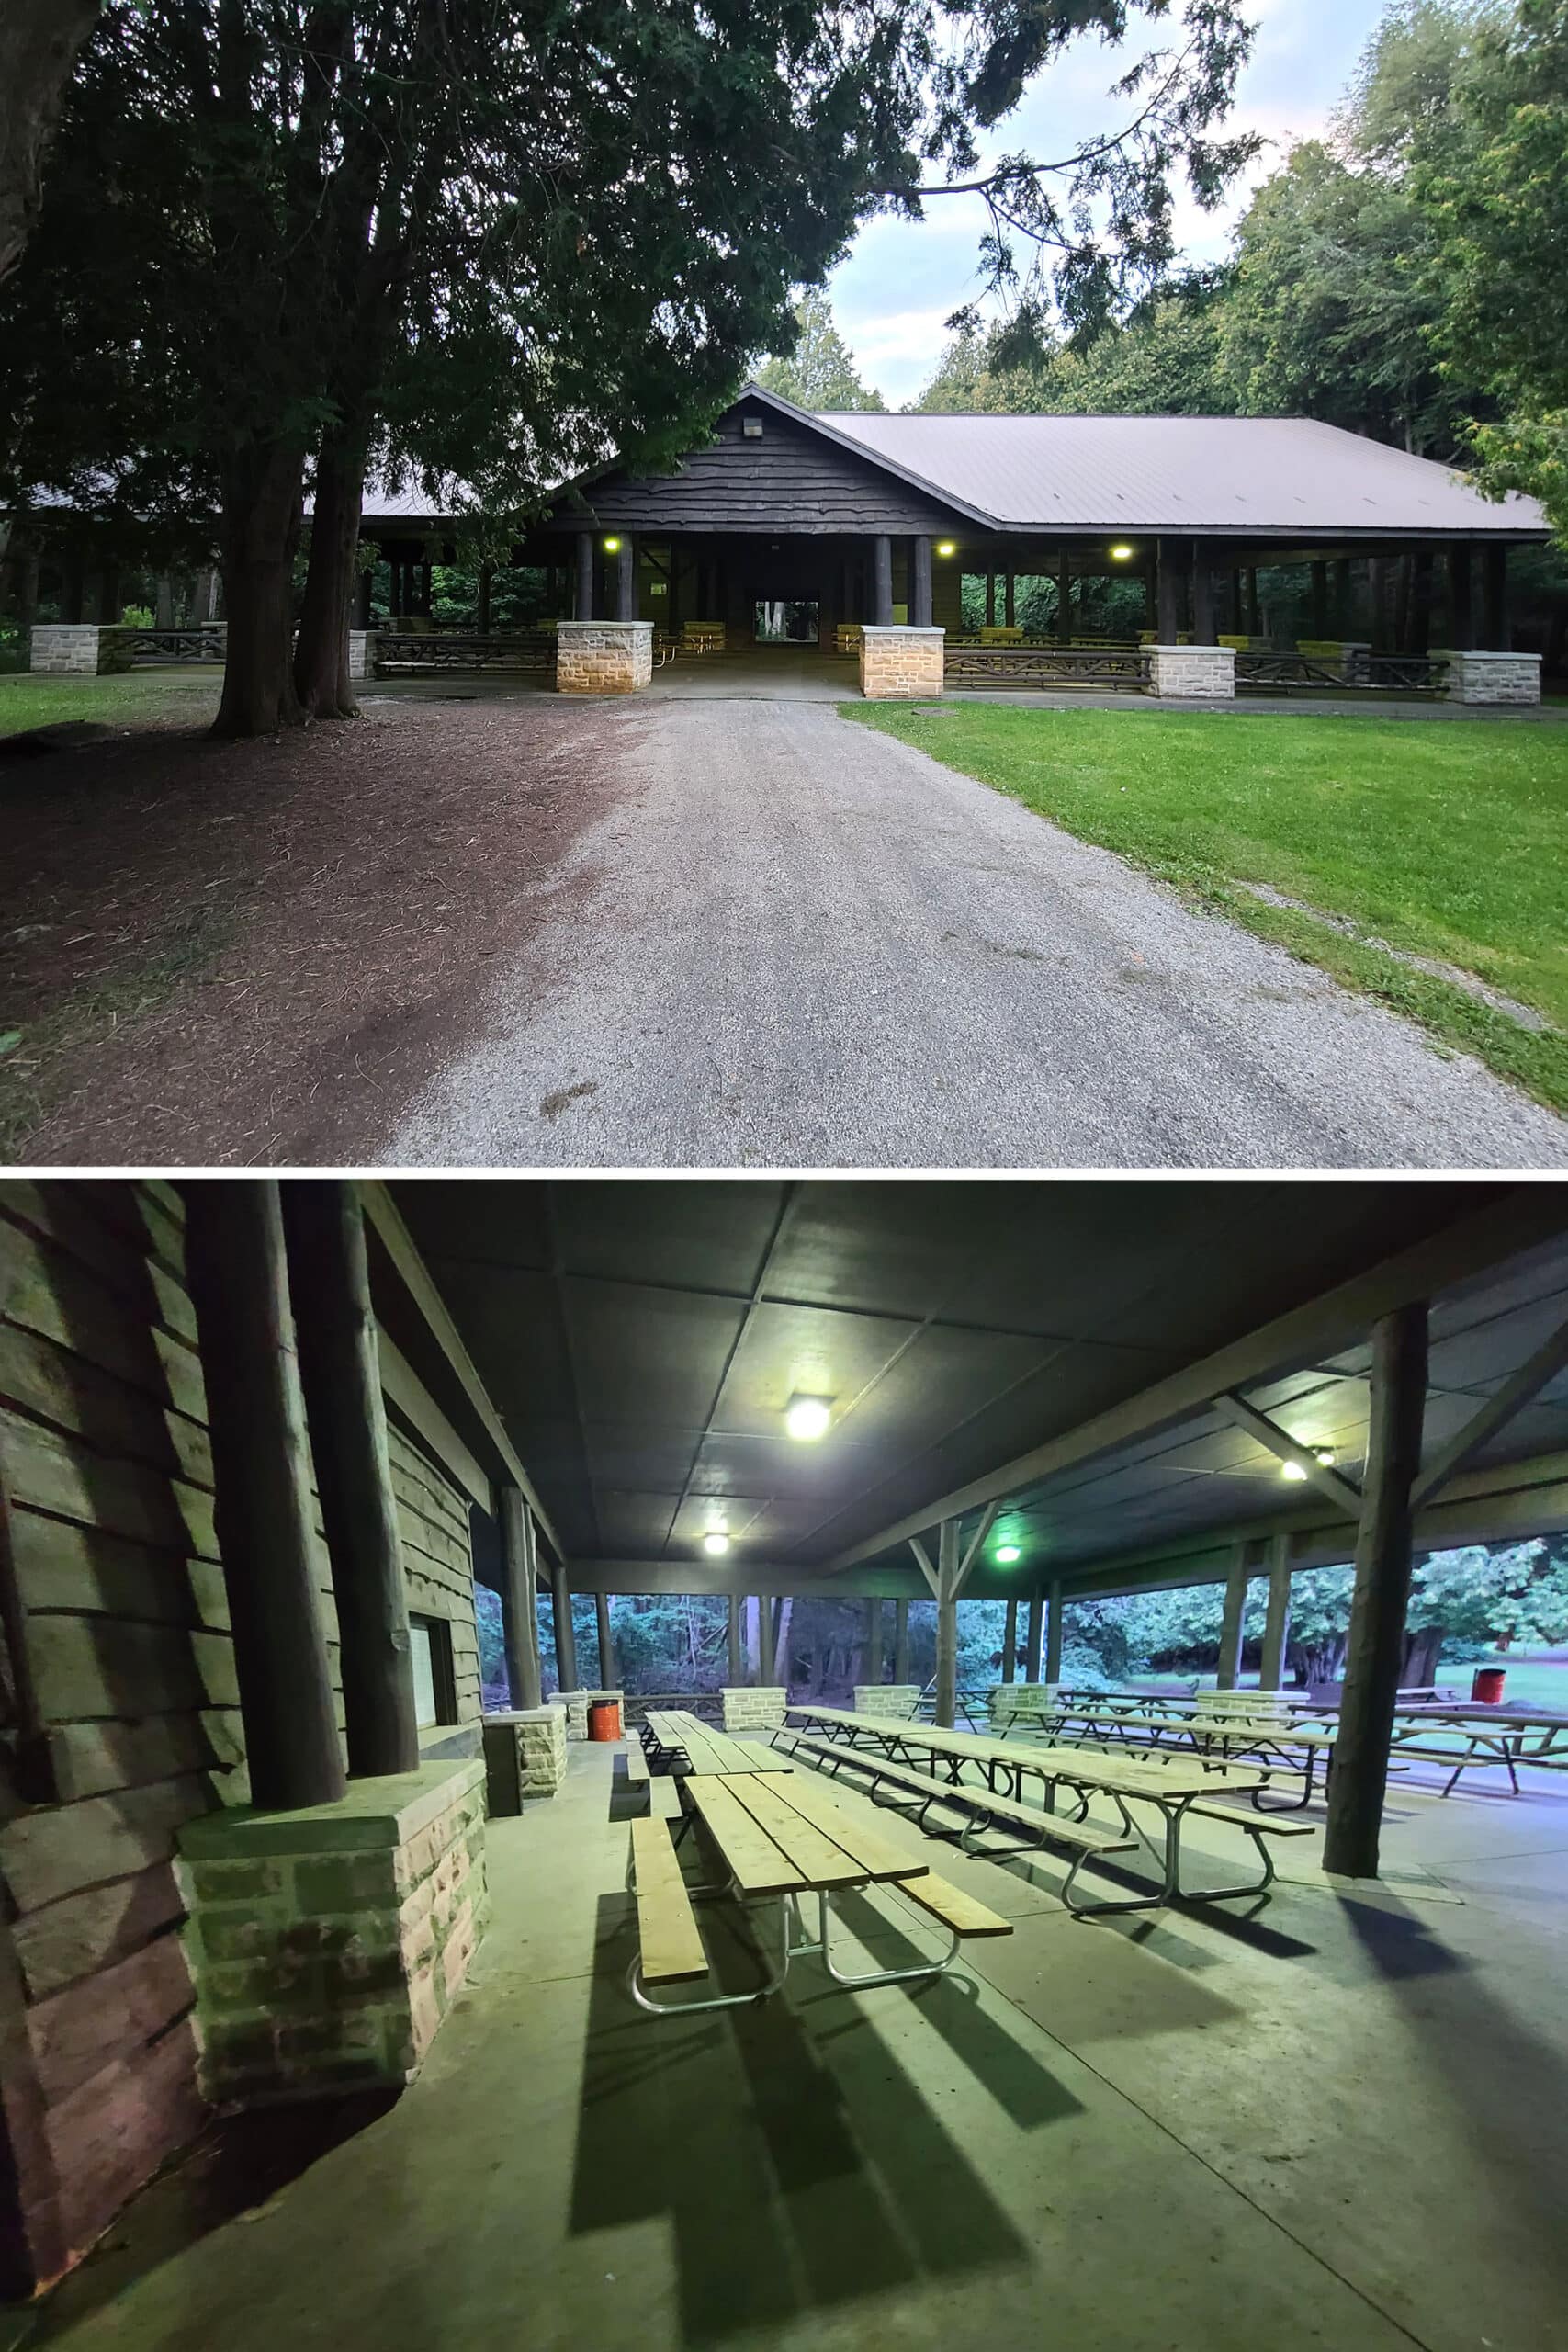 2 part image showing the interior and exterior of the Kay Marston Pavilion, a large picnic shelter.